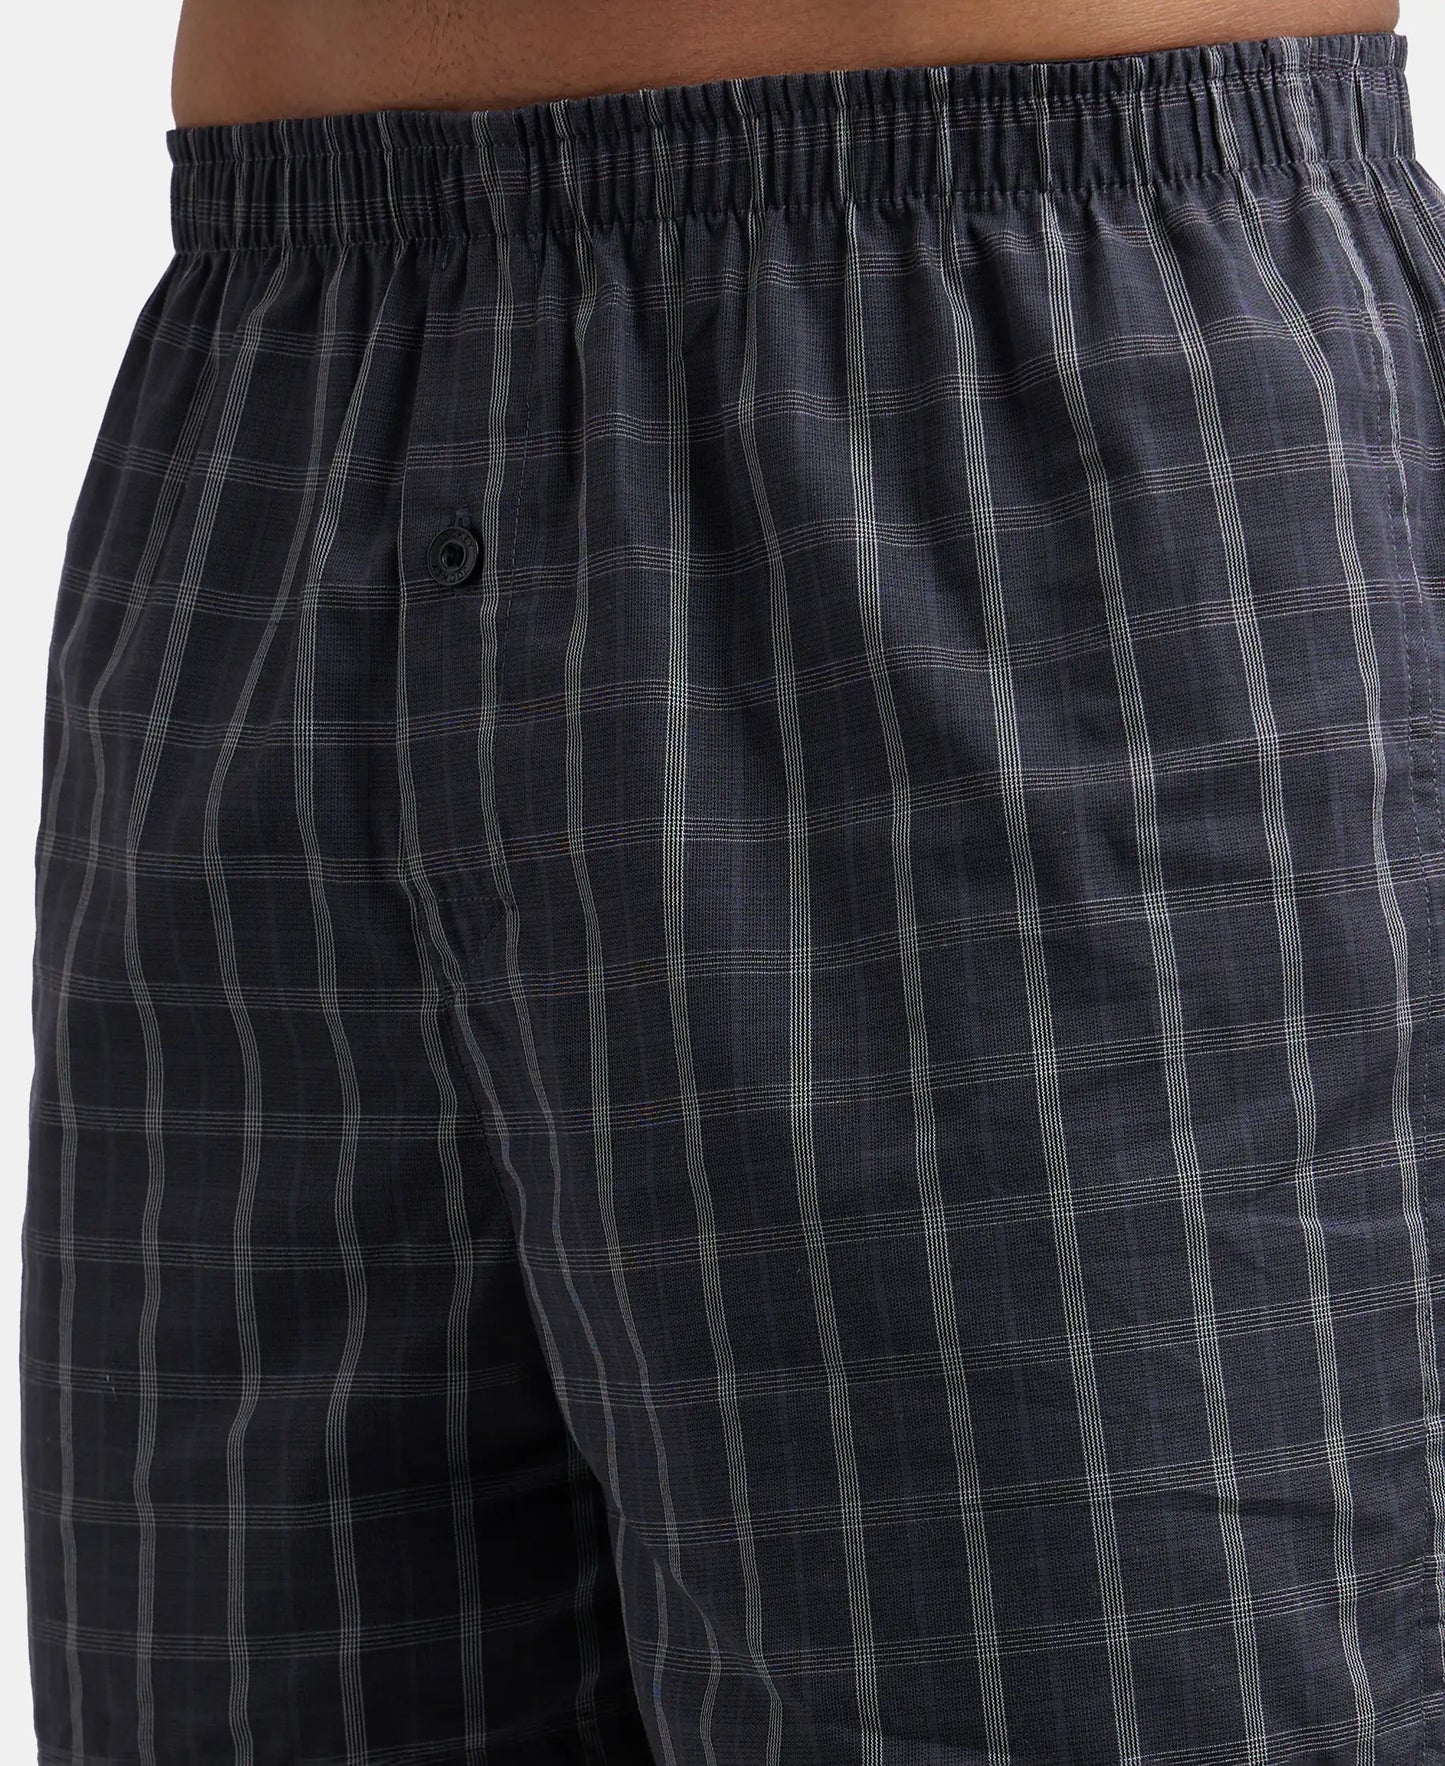 Super Combed Mercerized Cotton Woven Checkered Inner Boxers with Ultrasoft and Durable Inner Waistband - Grey-14